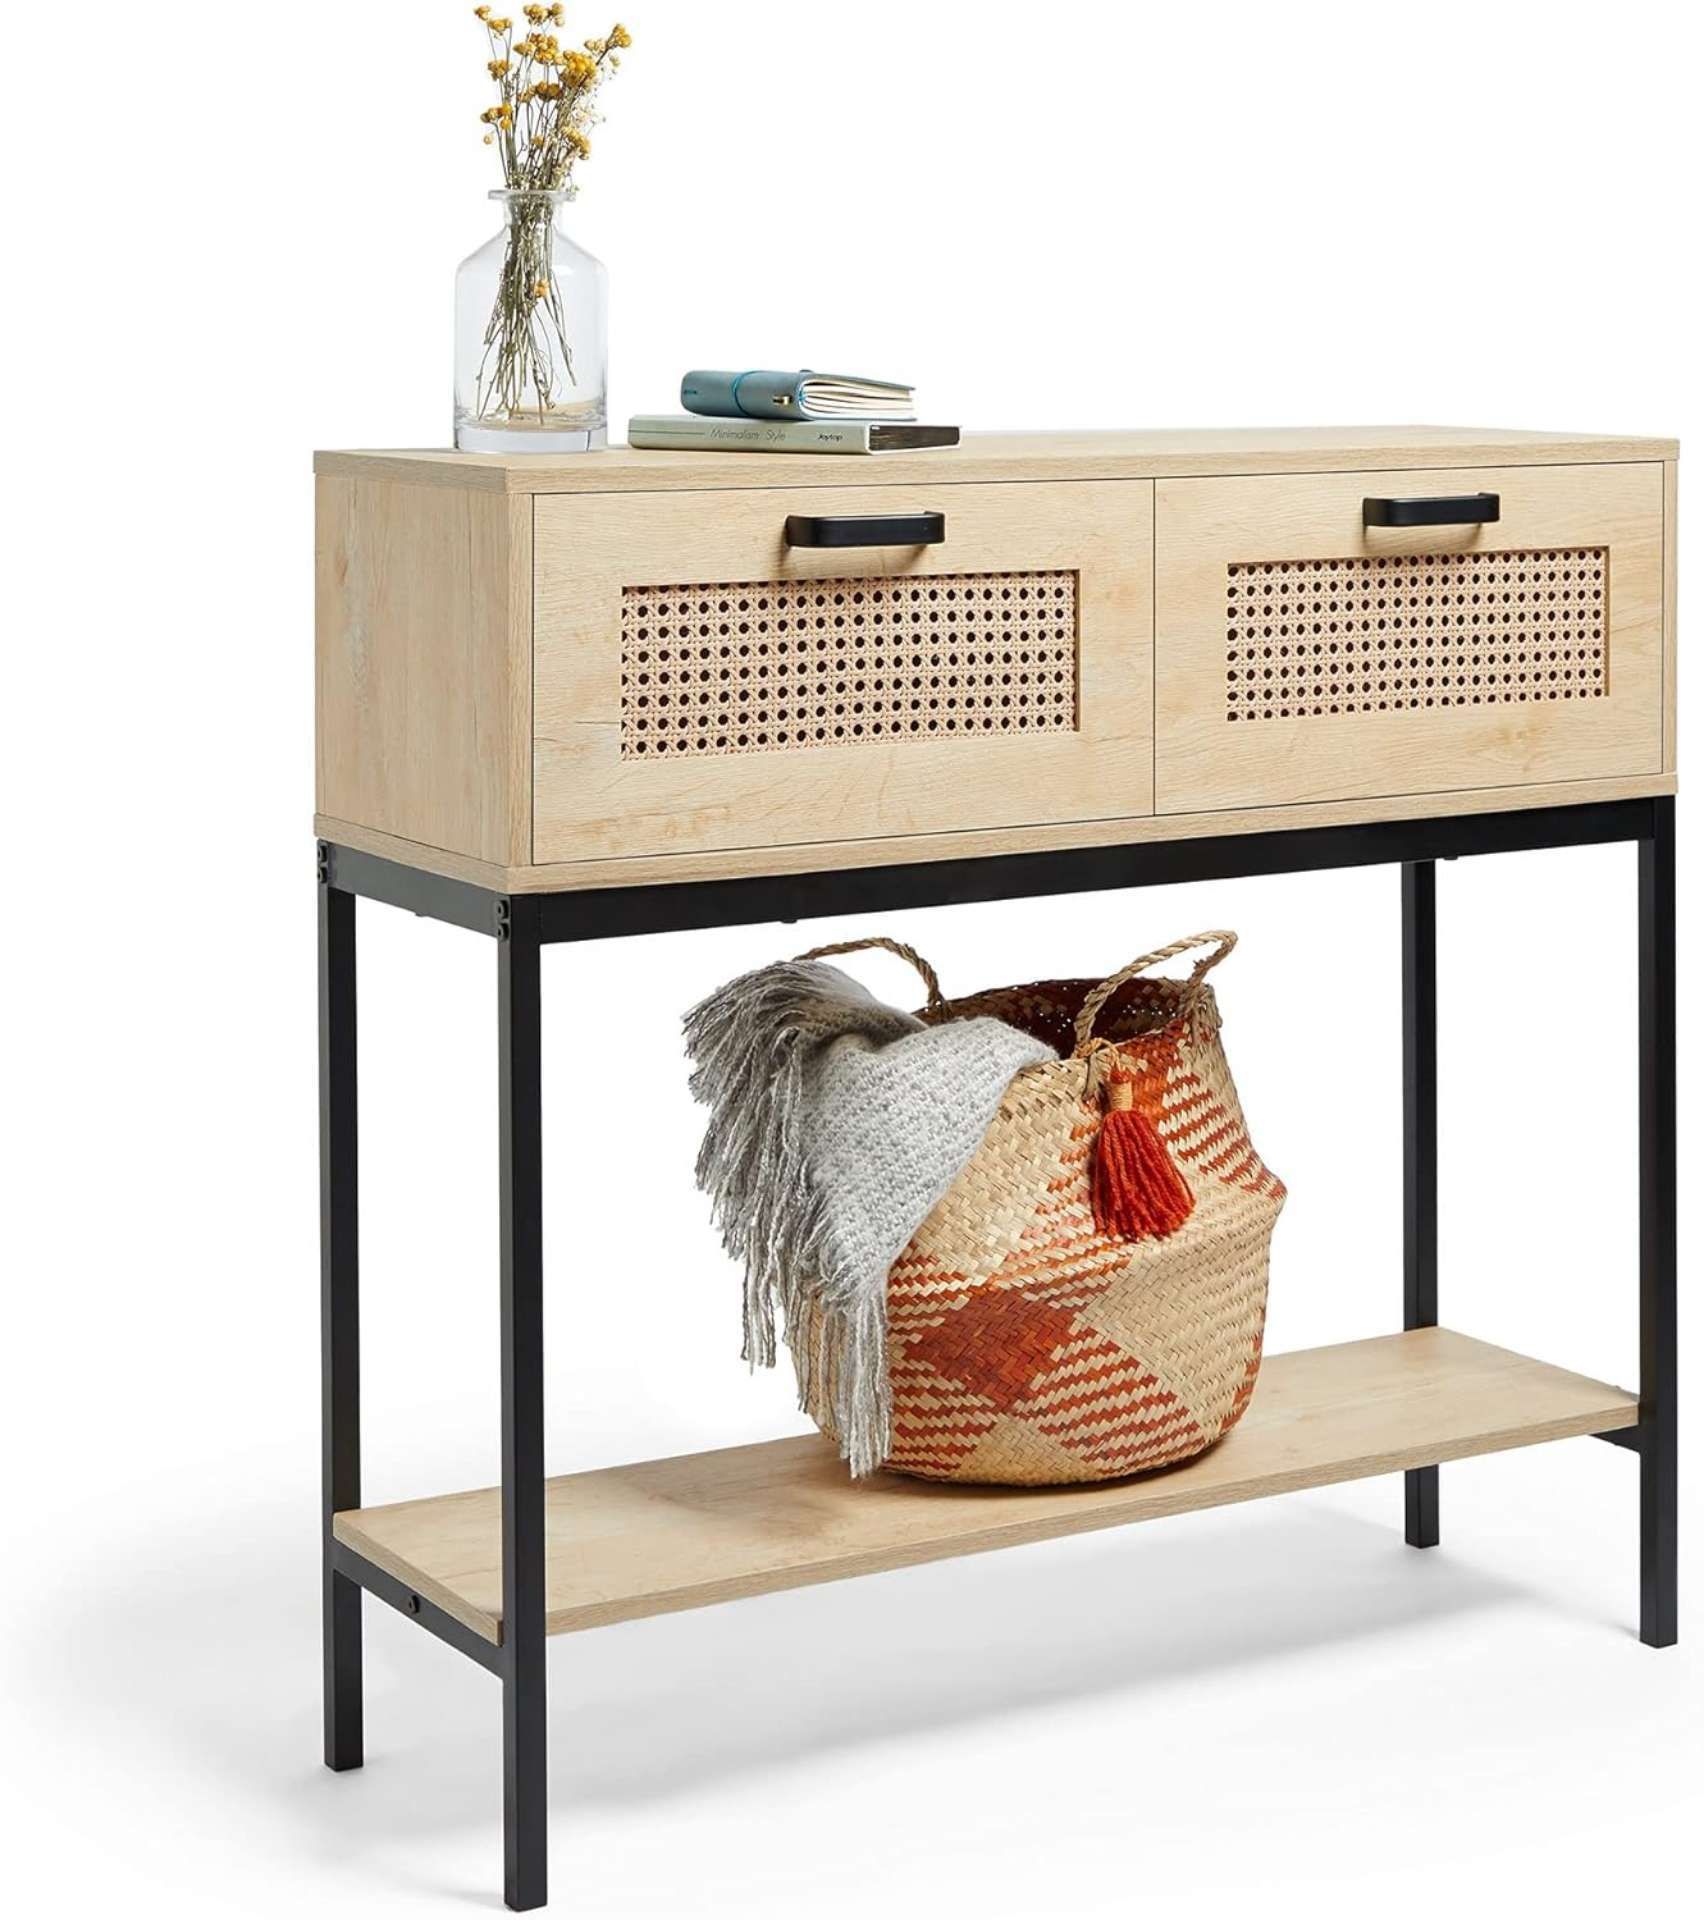 2 X BRAND NEW RATTAN CONSOLE TABLES, LIGHT WOOD EFFECT NORDIC SCANDI STYLE STORAGE CABINET RRP £